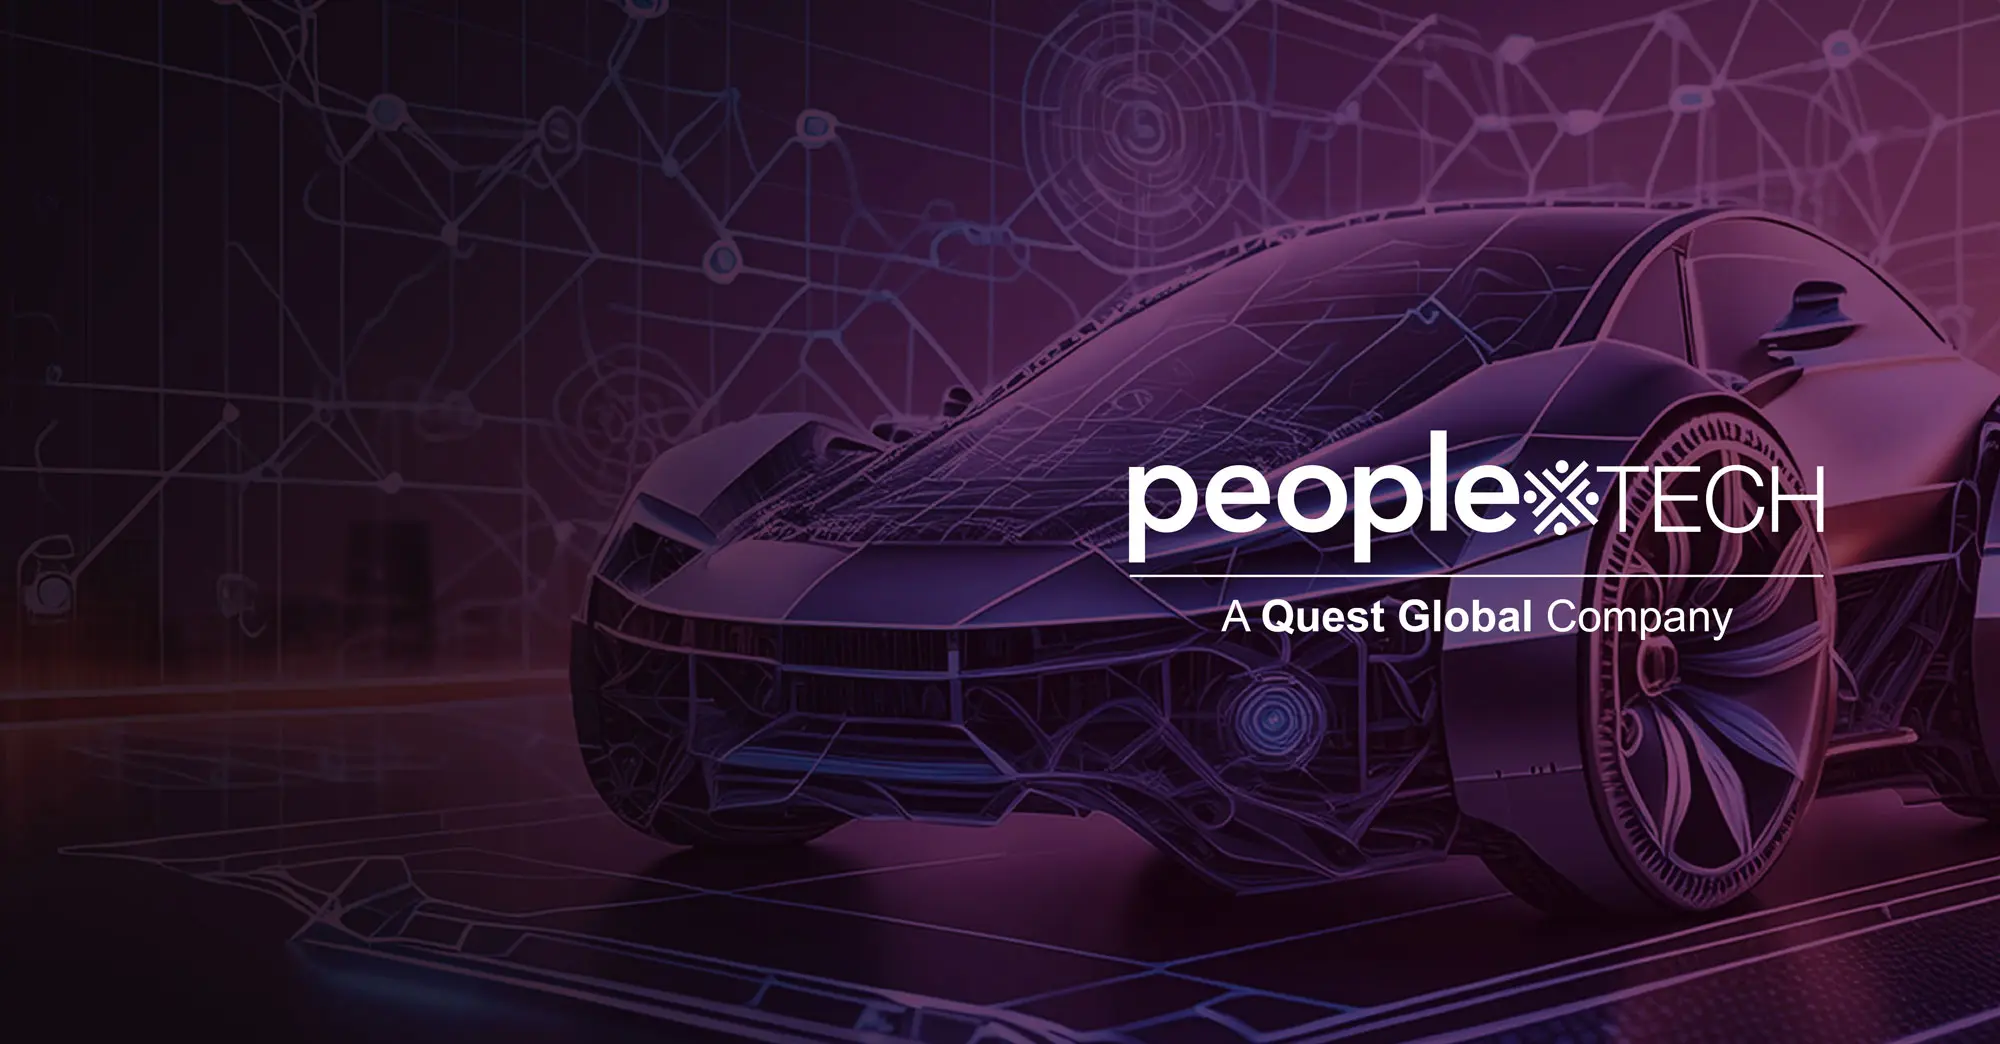 People Tech Group is now part of the Quest Global family